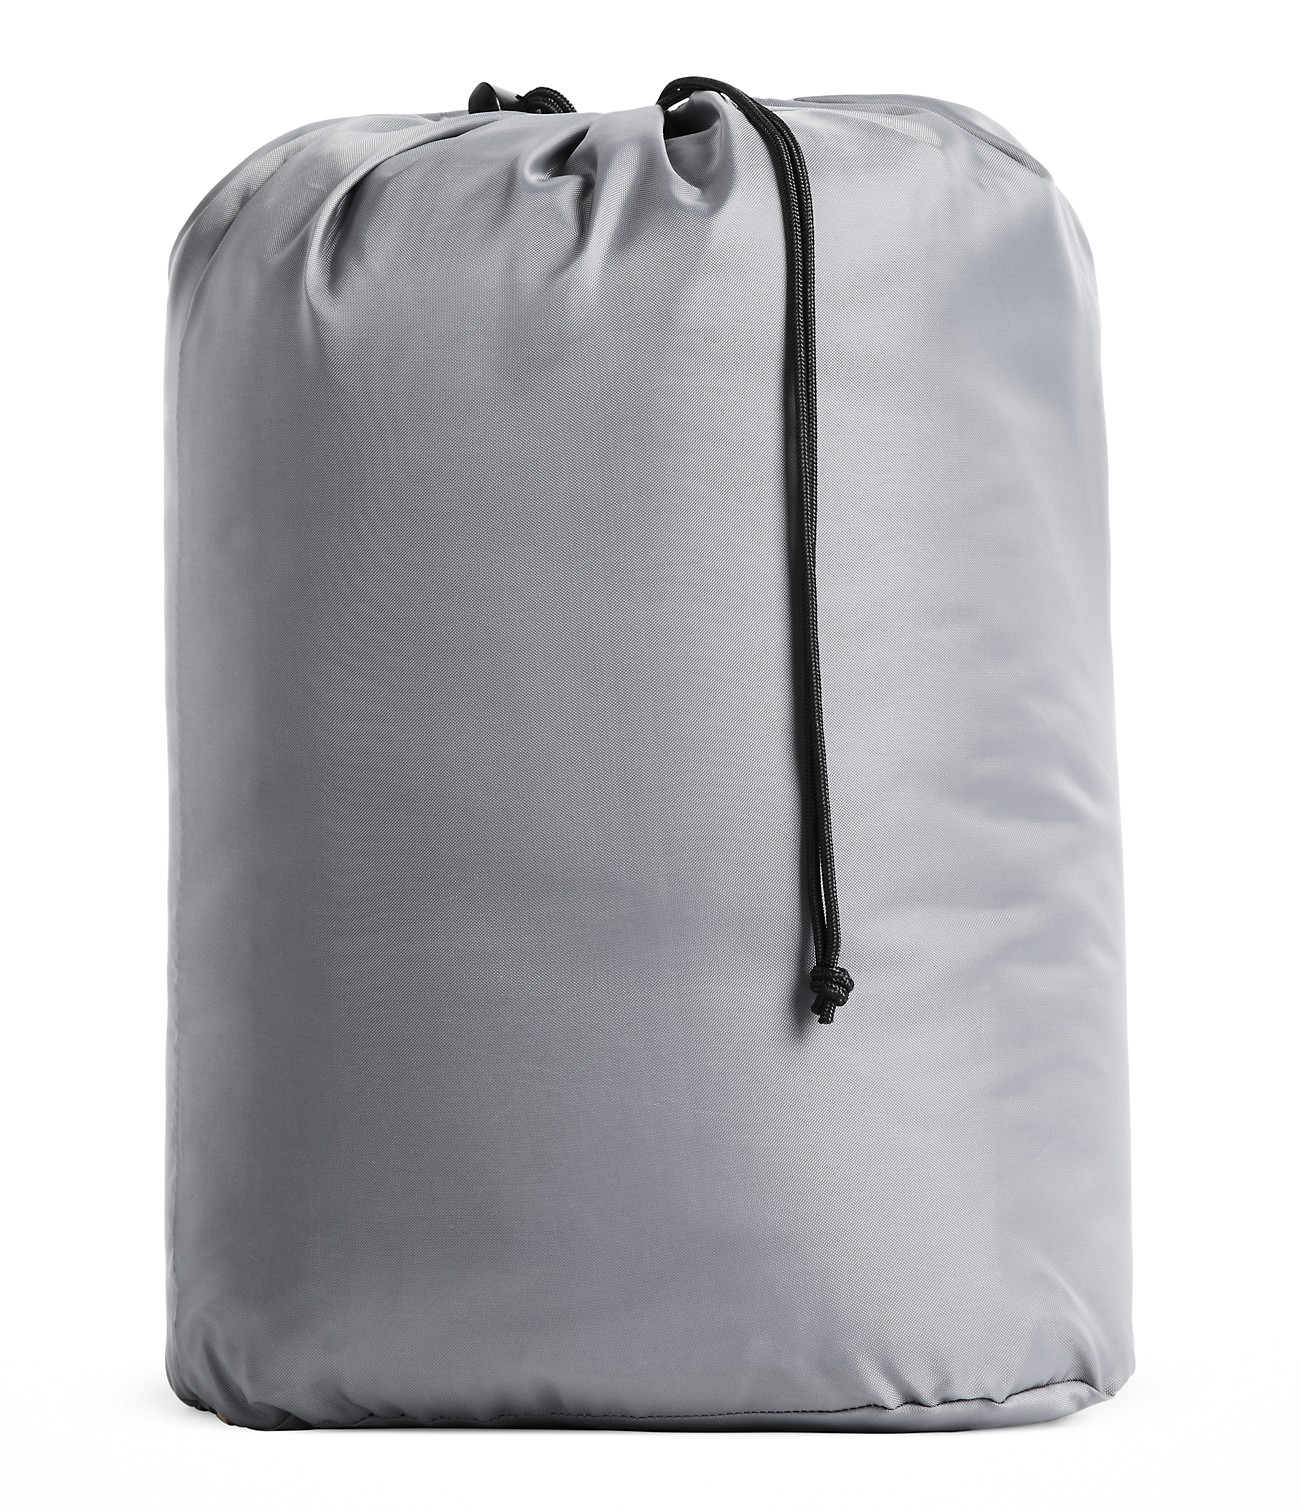 Wasatch 30/-1 Sleeping Bag | The North Face